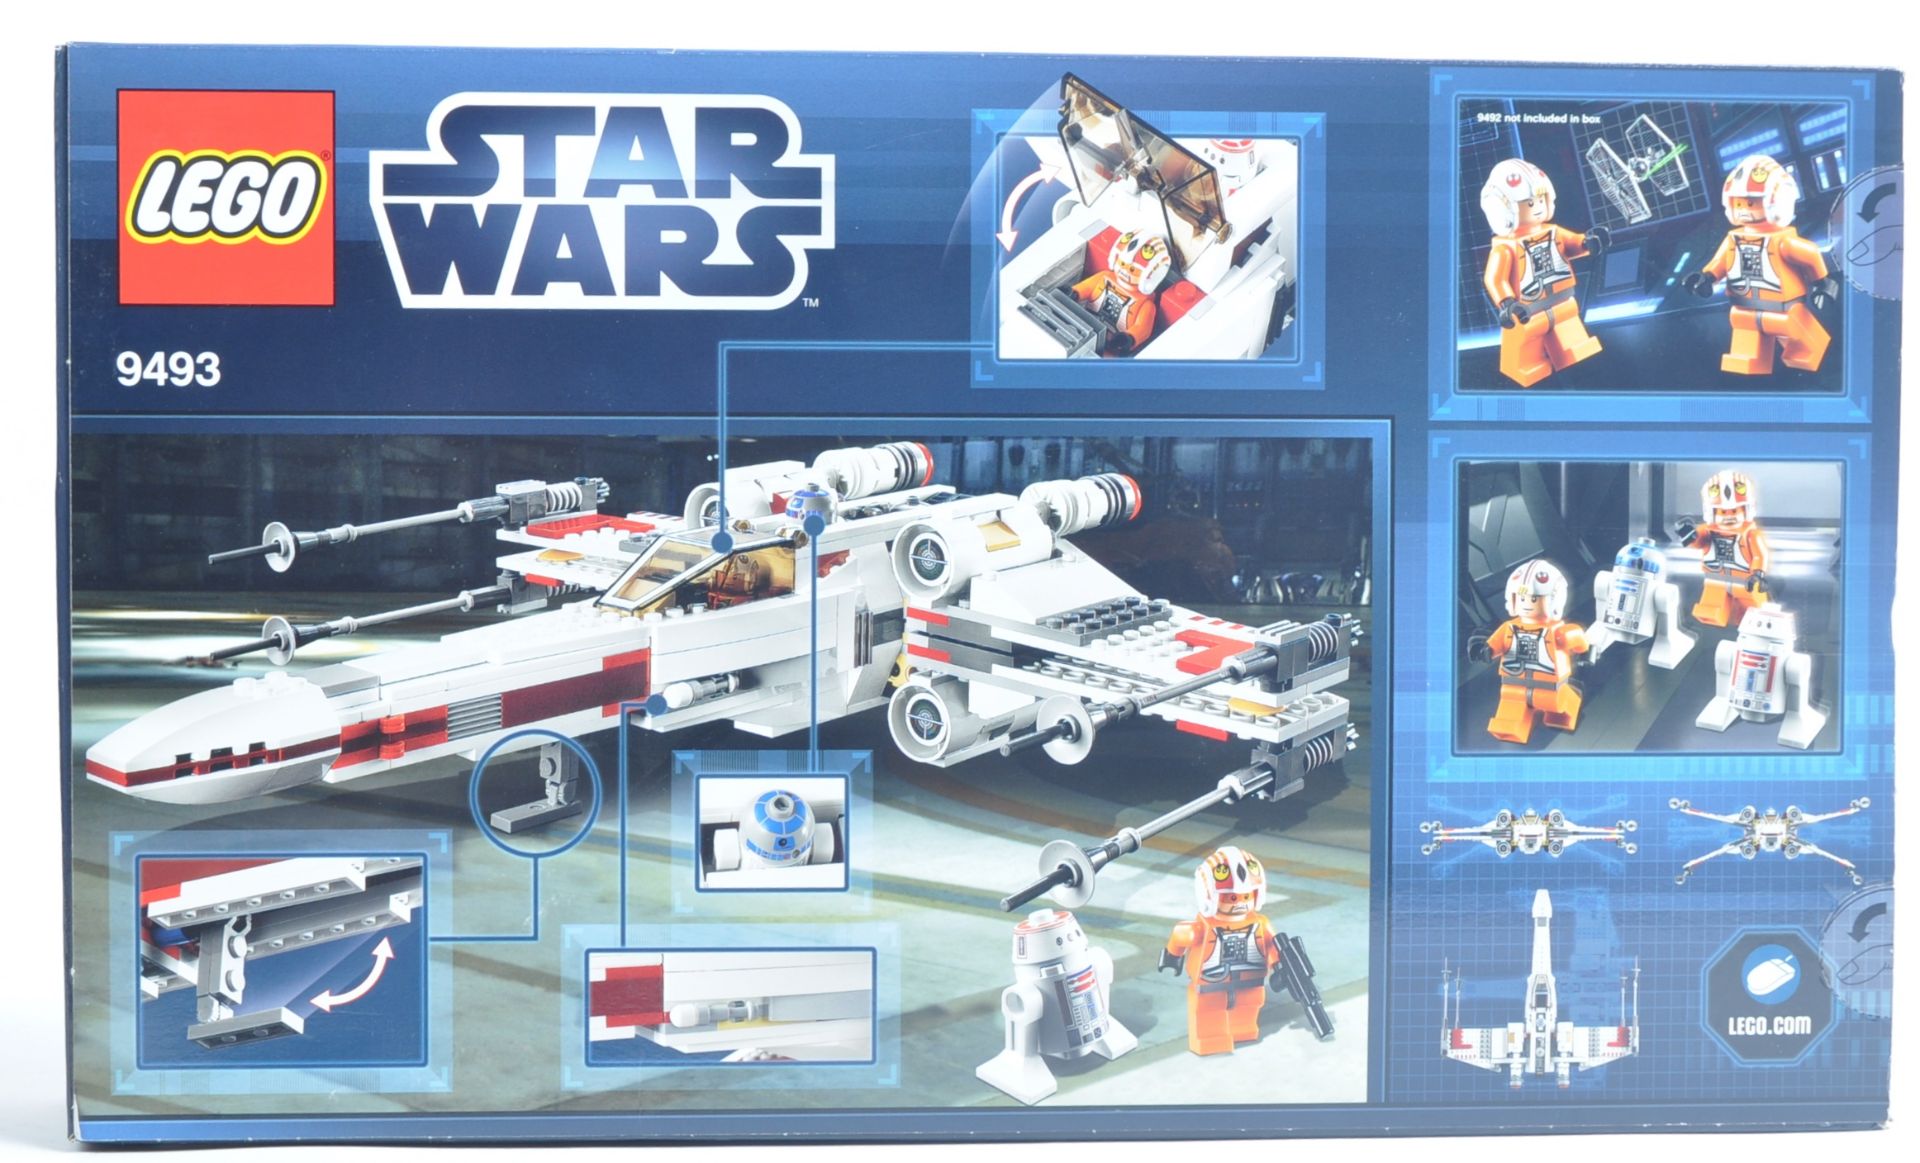 LEGO SET - LEGO STAR WARS - 9493 - X-WING STARFIGHTER - Image 2 of 4